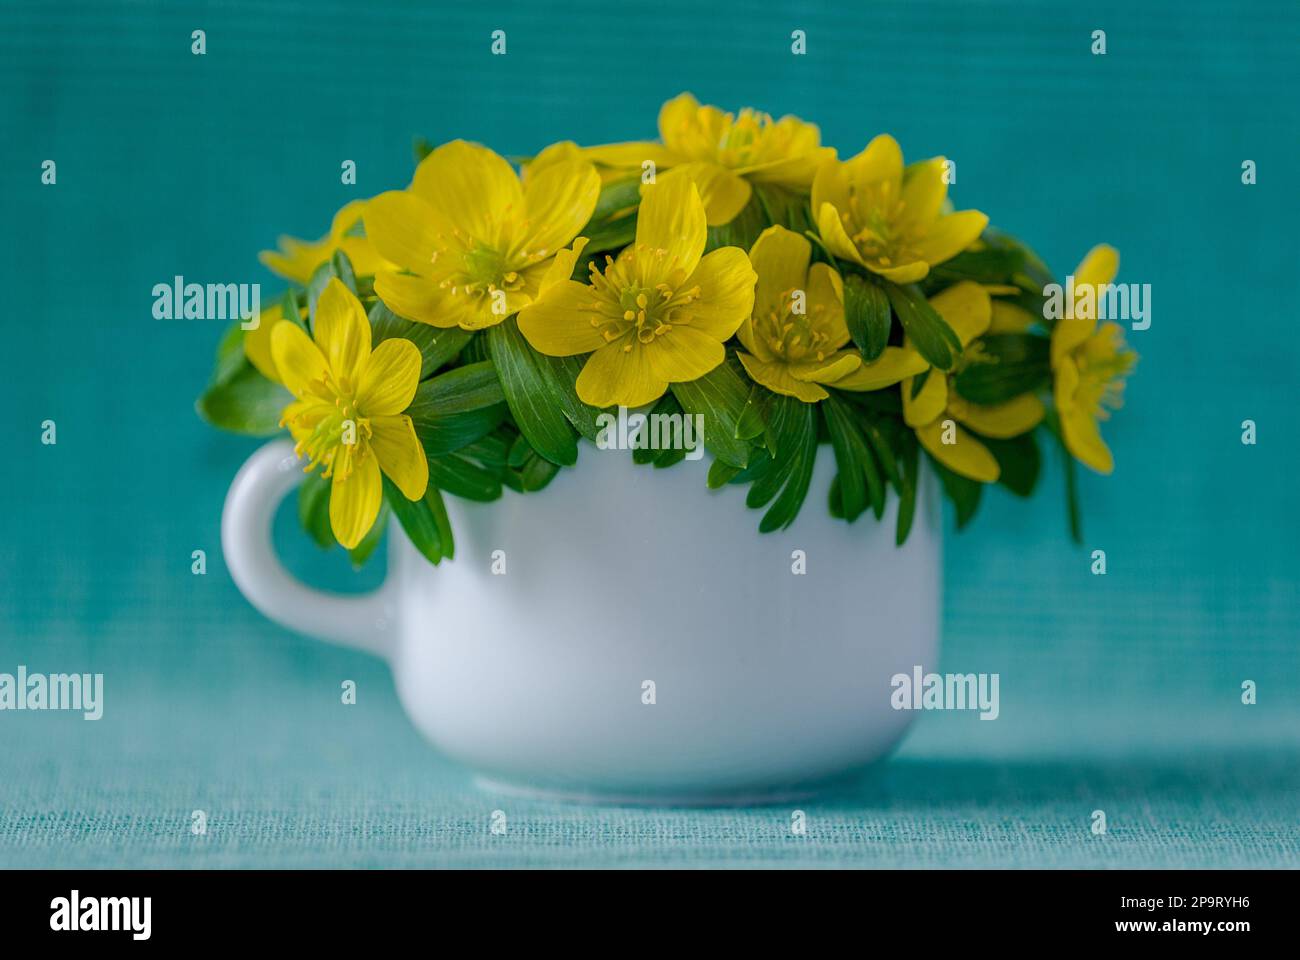 Yellow eranthis hyemalis flowers in the white espresso cup on the light green background Stock Photo